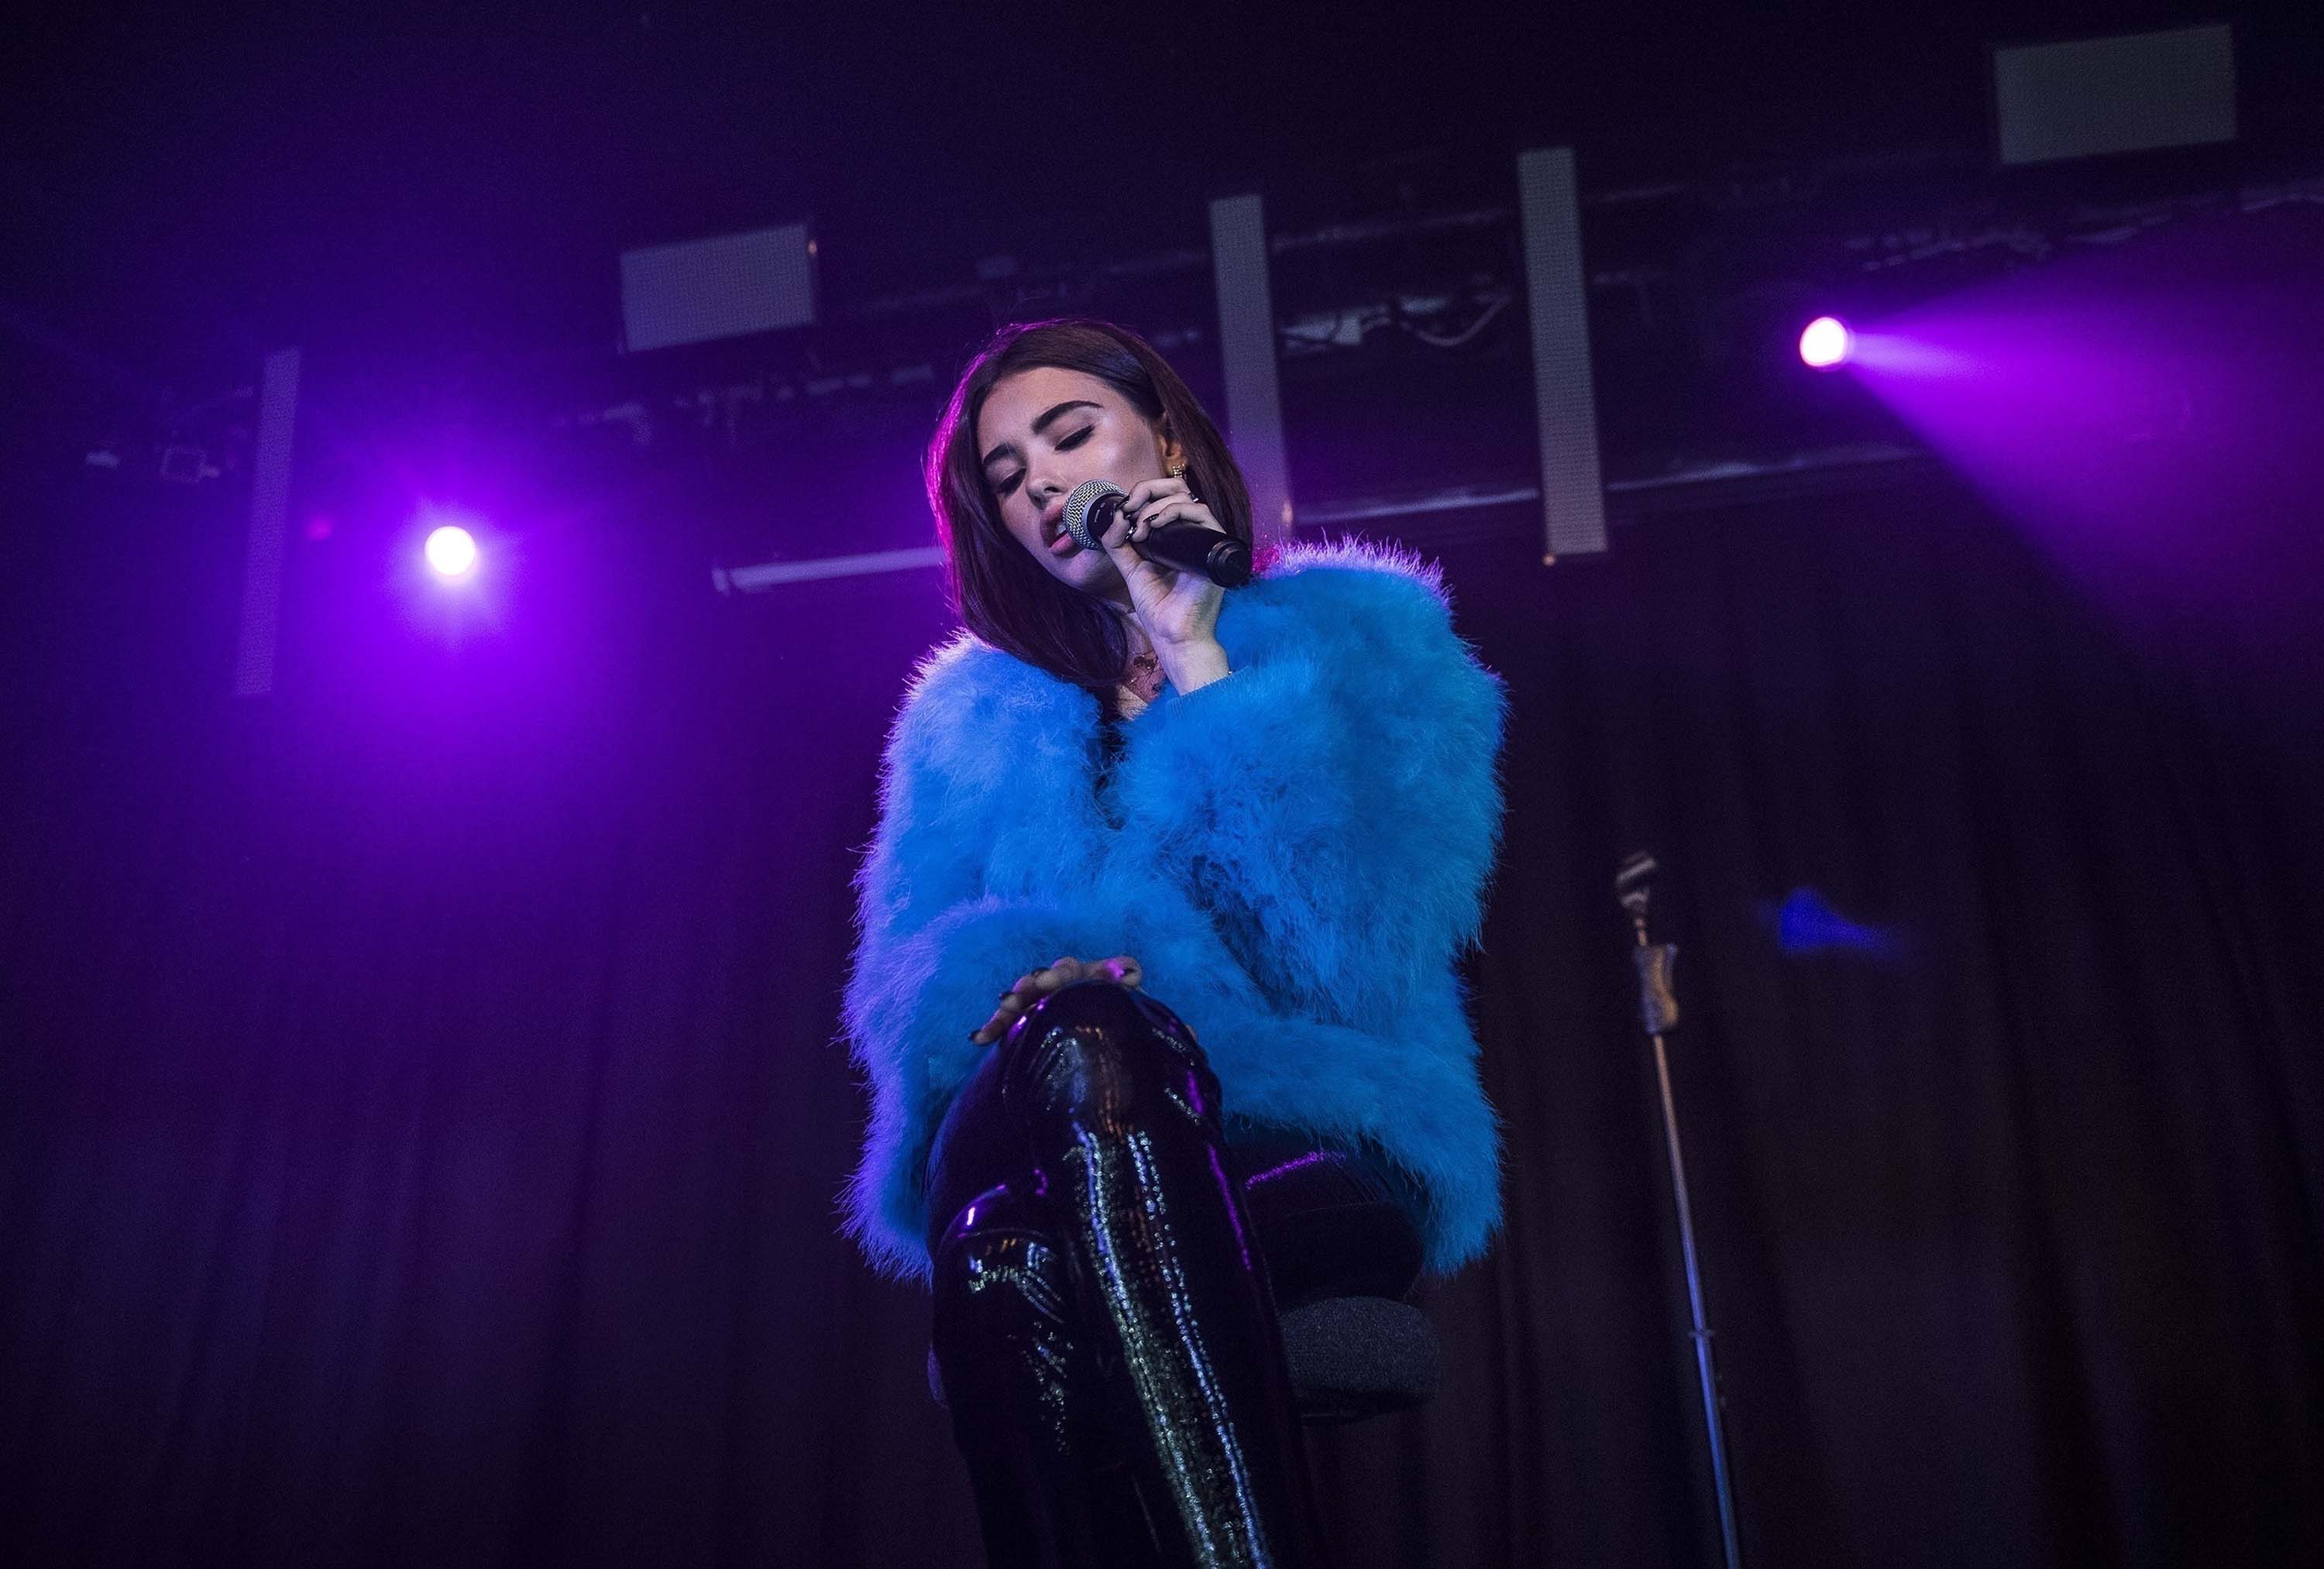 Madison Beer performs at the Hoxton Square Bar & Kitchen